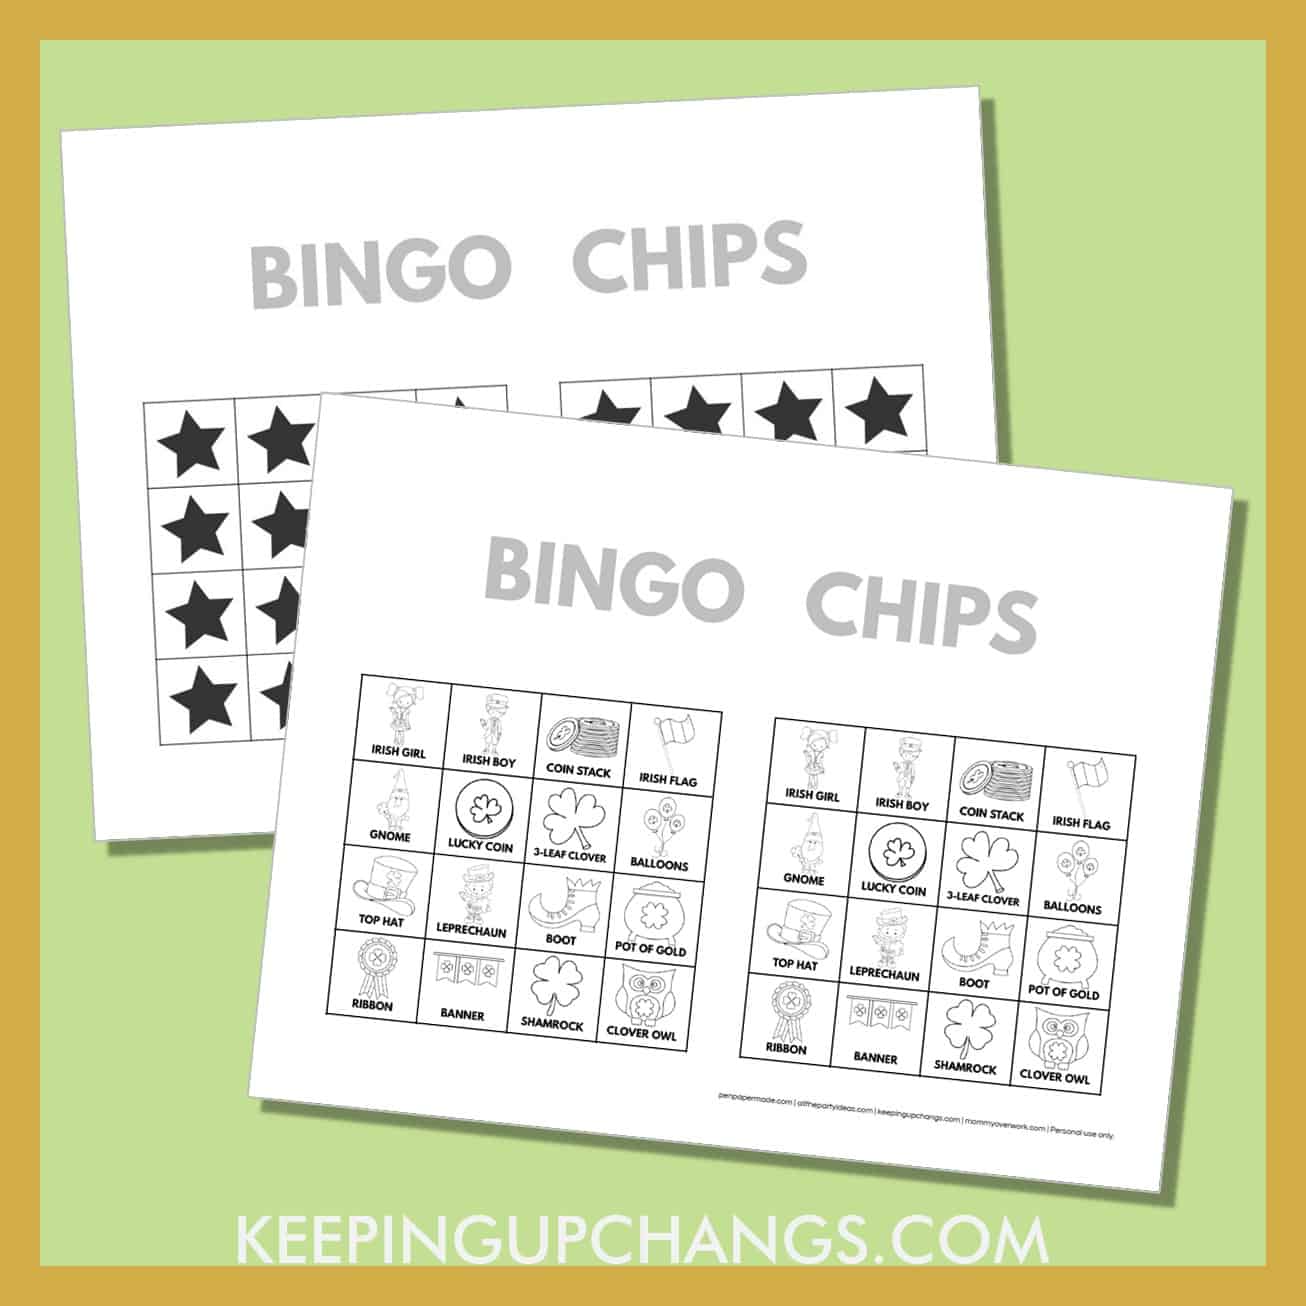 free st patrick's day bingo card 4x4 black white coloring game chips, tokens, markers.